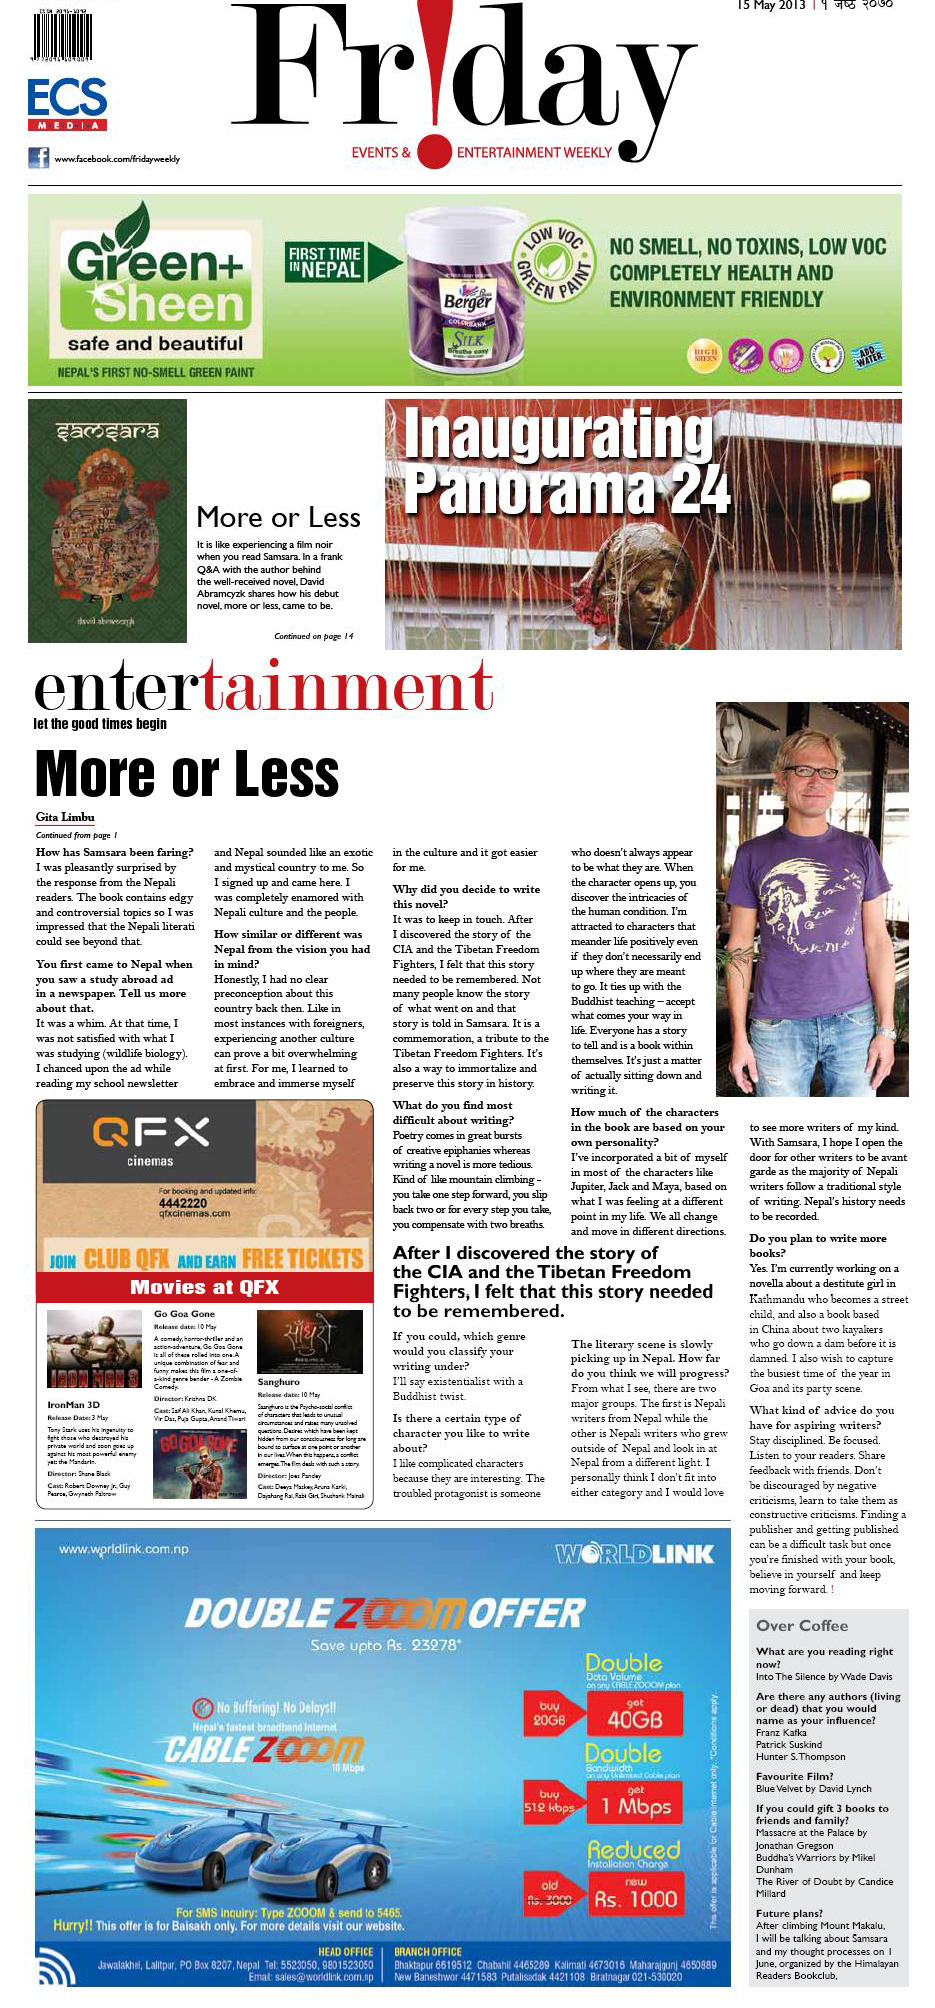 “More or Less” as featured in Friday Entertainment Magazine